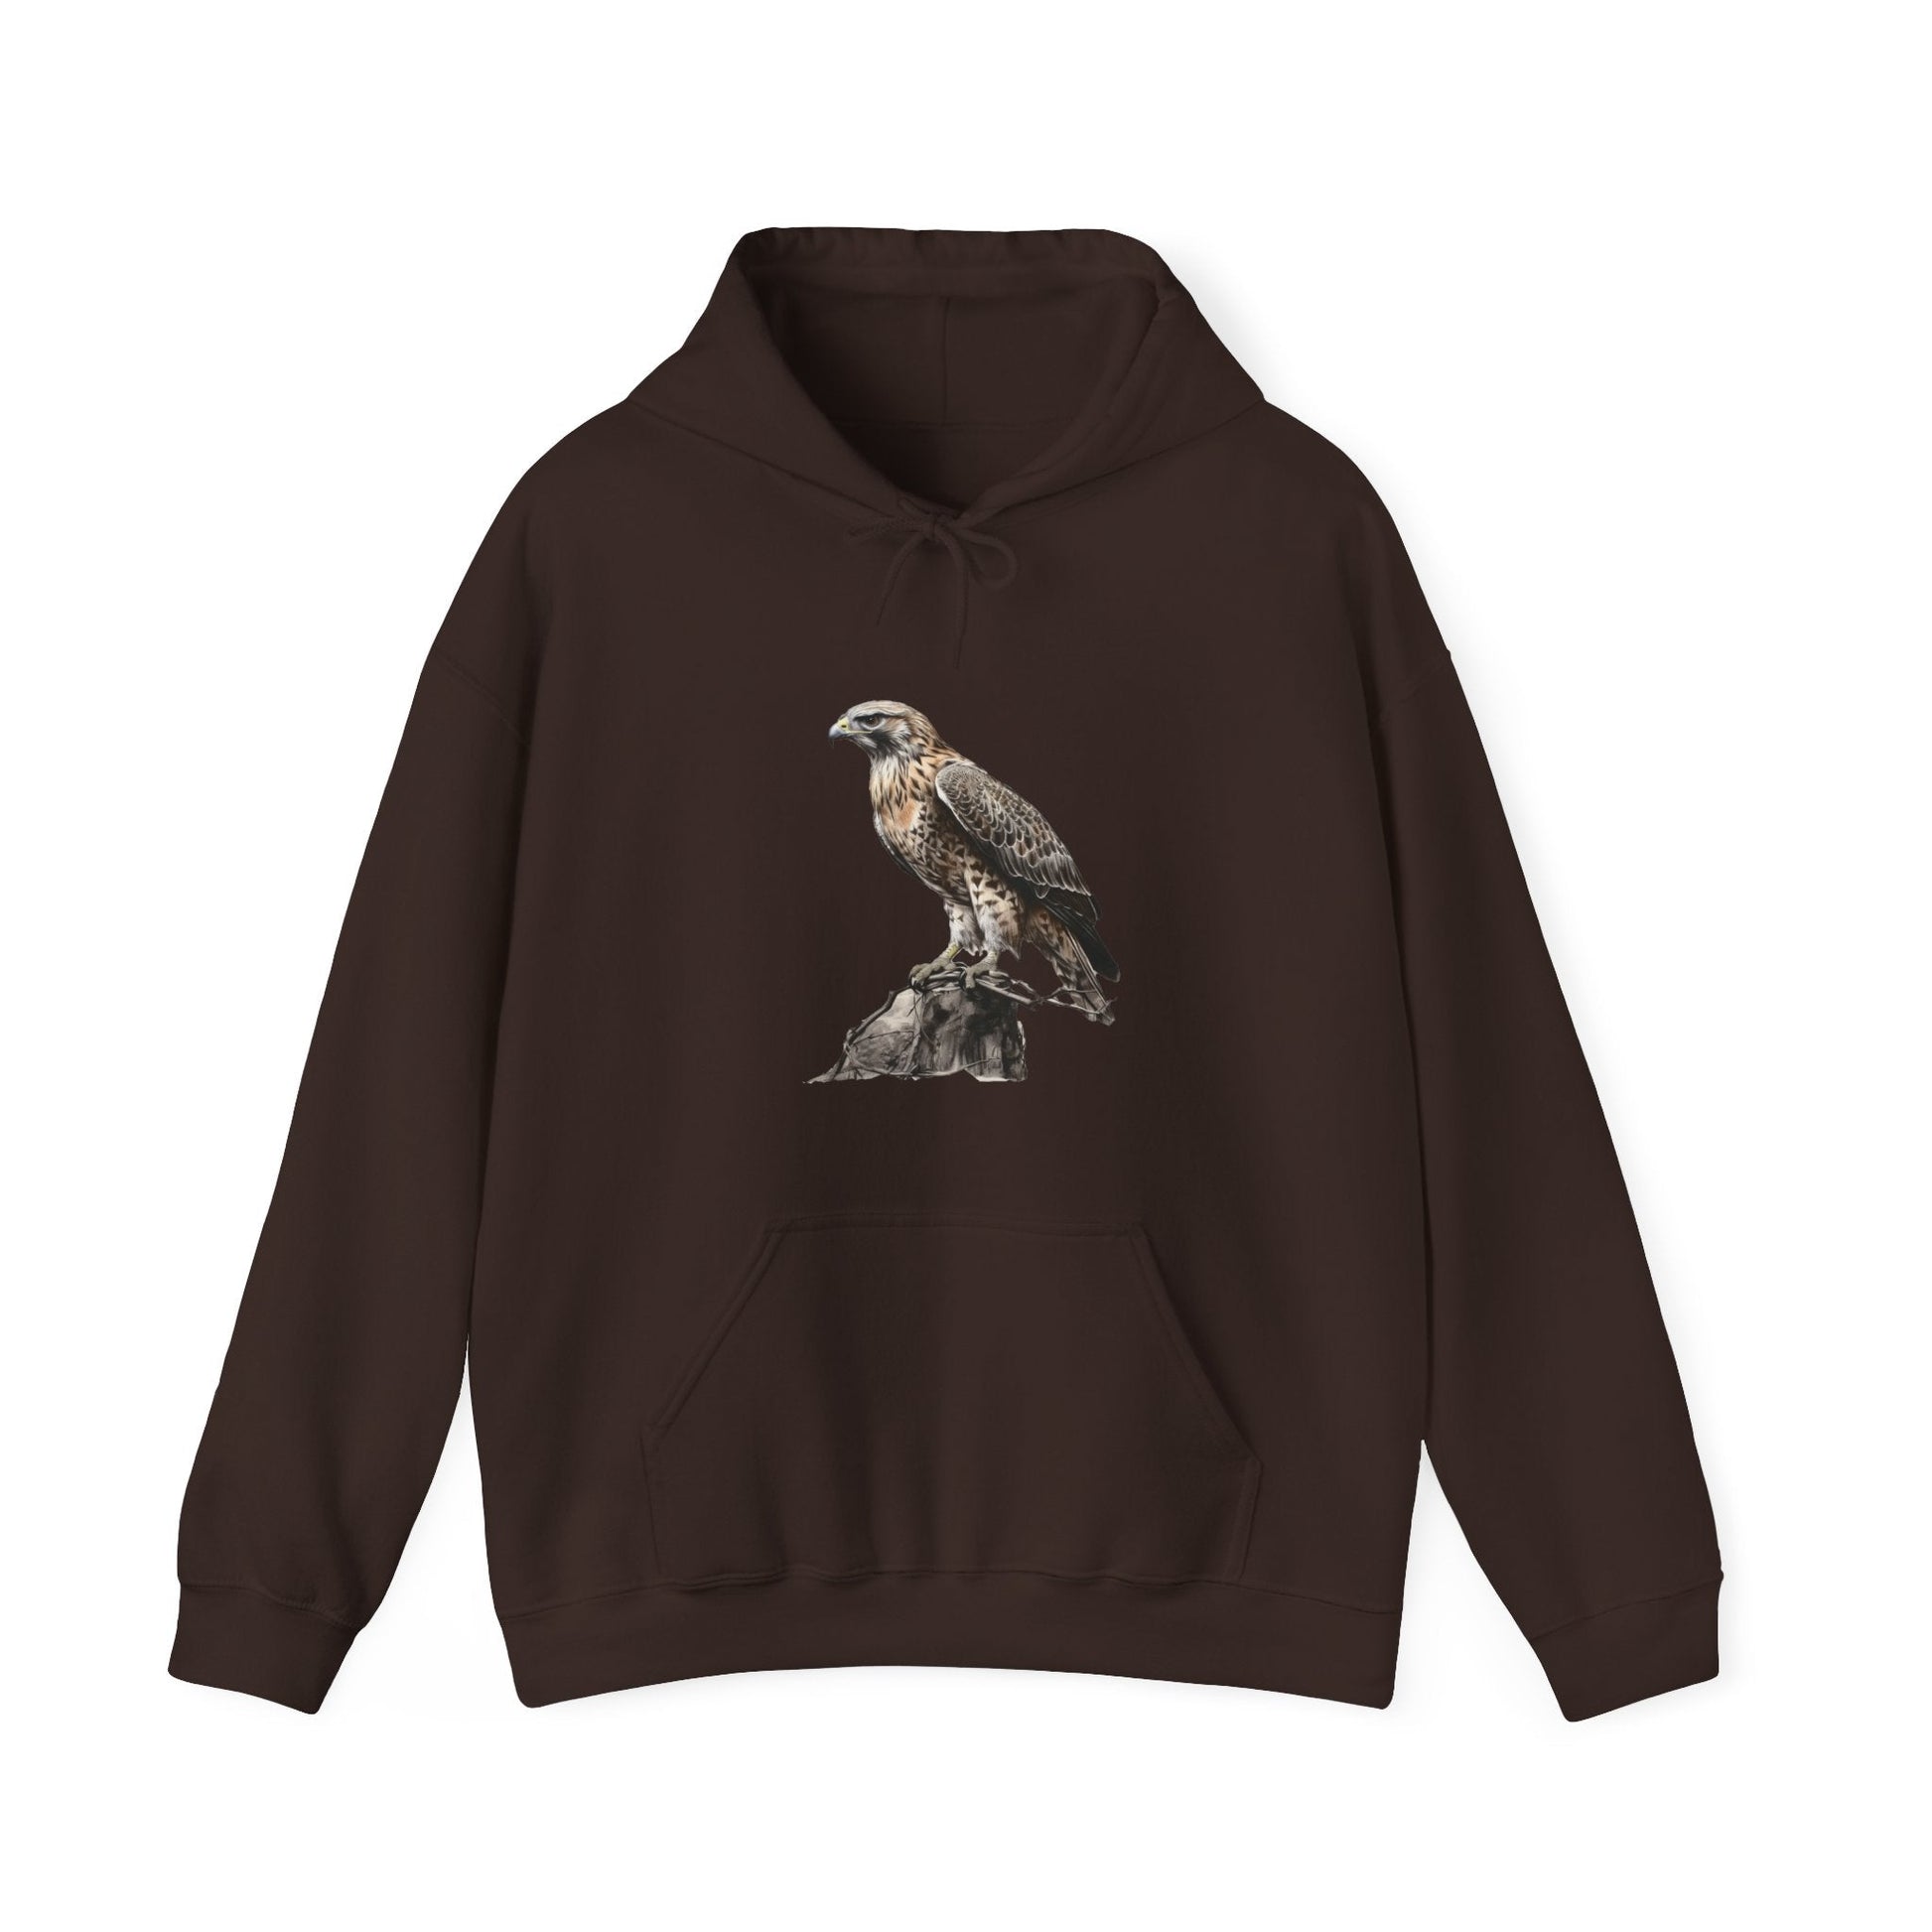 Red Tail Hawk Hoodie, Wildlife Artwork on Sweater, Protect National Parks, Camping Outdoors Shirt - FlooredByArt